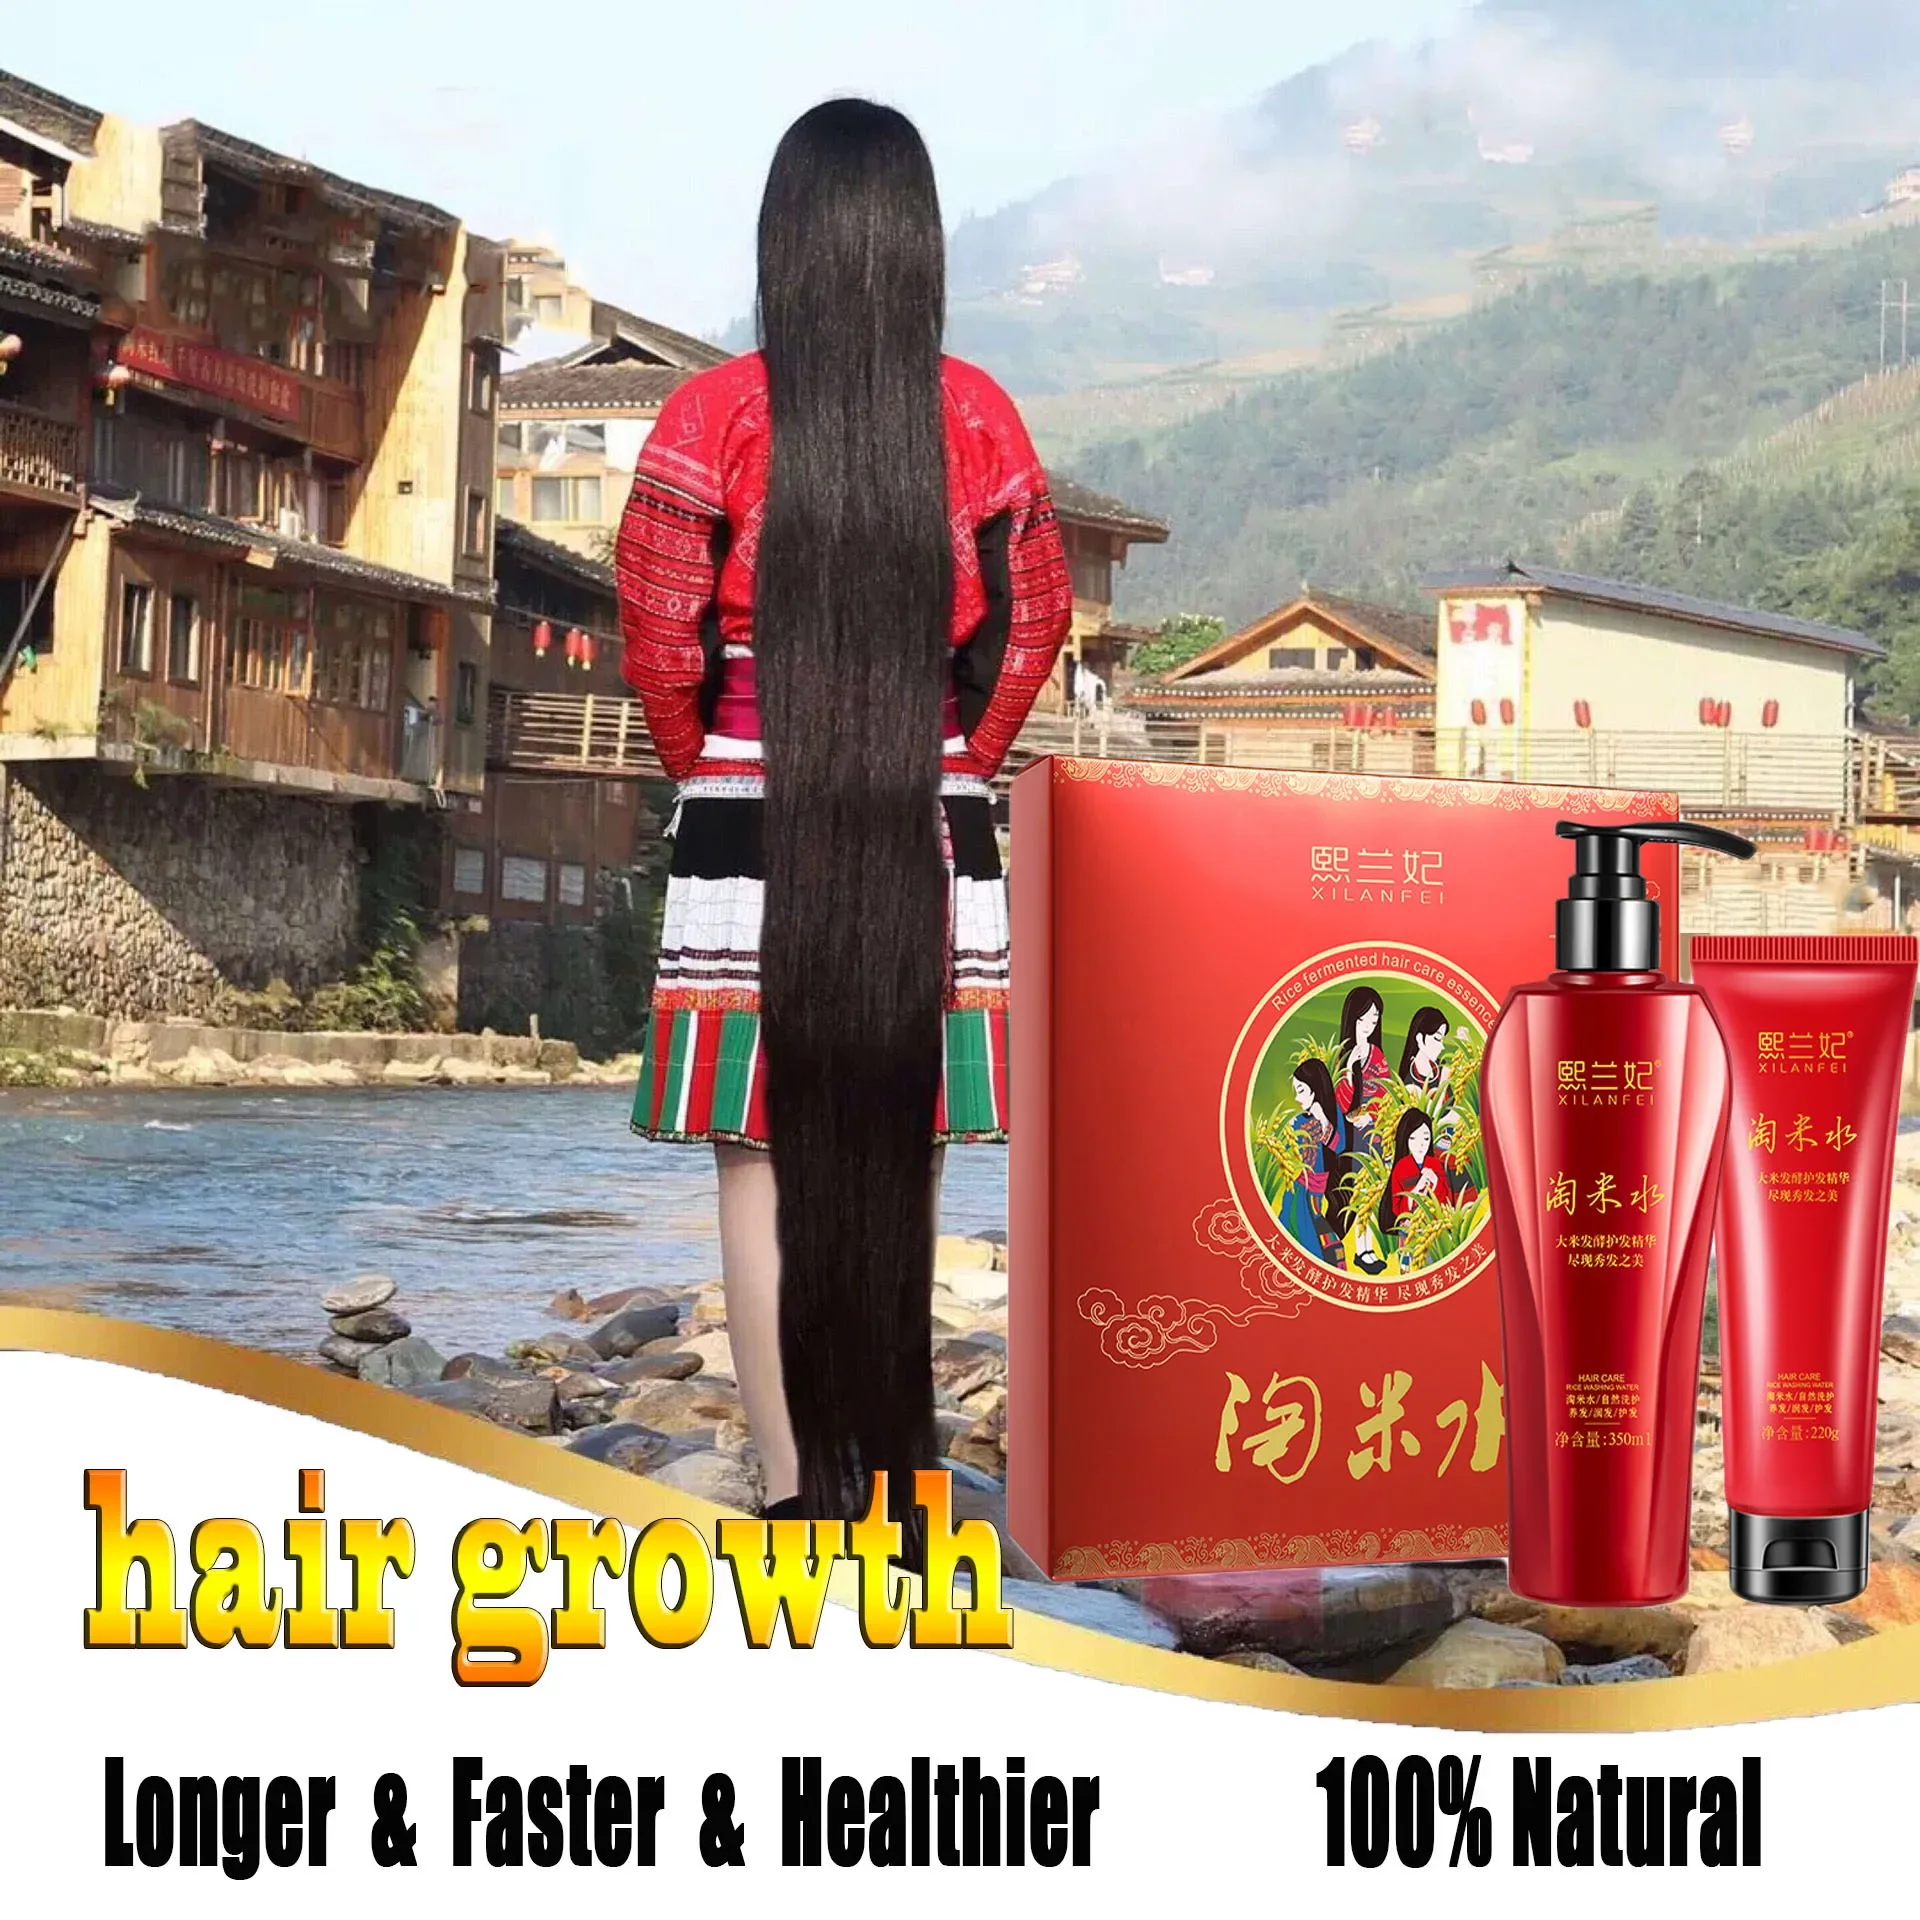 

350ml Rice Hair Growth Shampoo 220ml Conditioner Anti Hair Loss Fast Grow Activate Scalp Natural Hair Care Product for Men Women